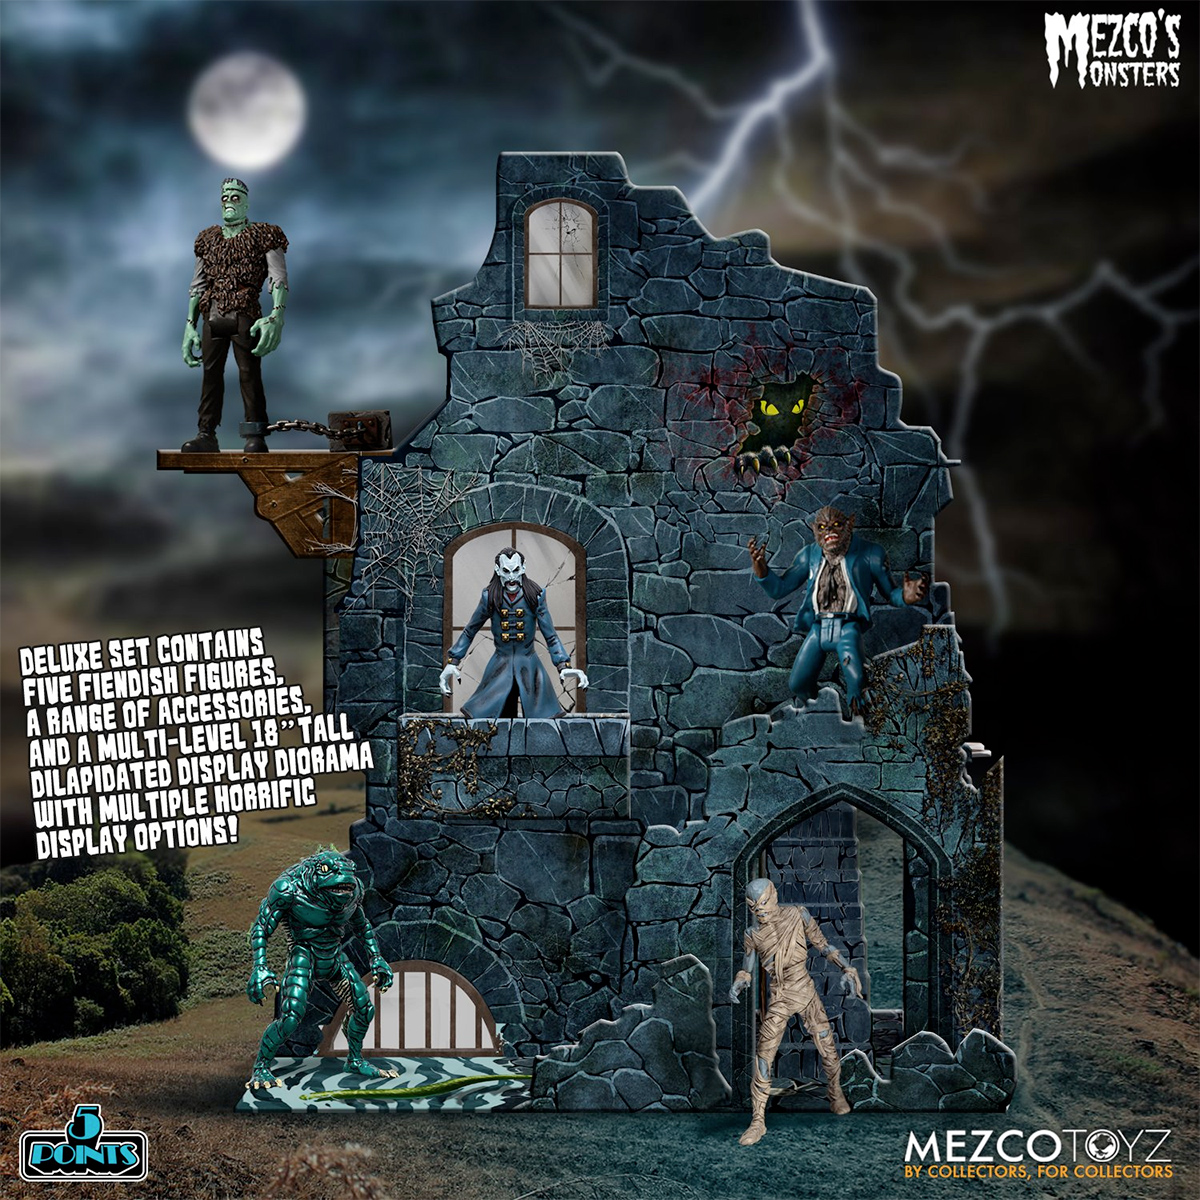 Mezco’s Monsters: Tower of Fear Deluxe Boxed Set